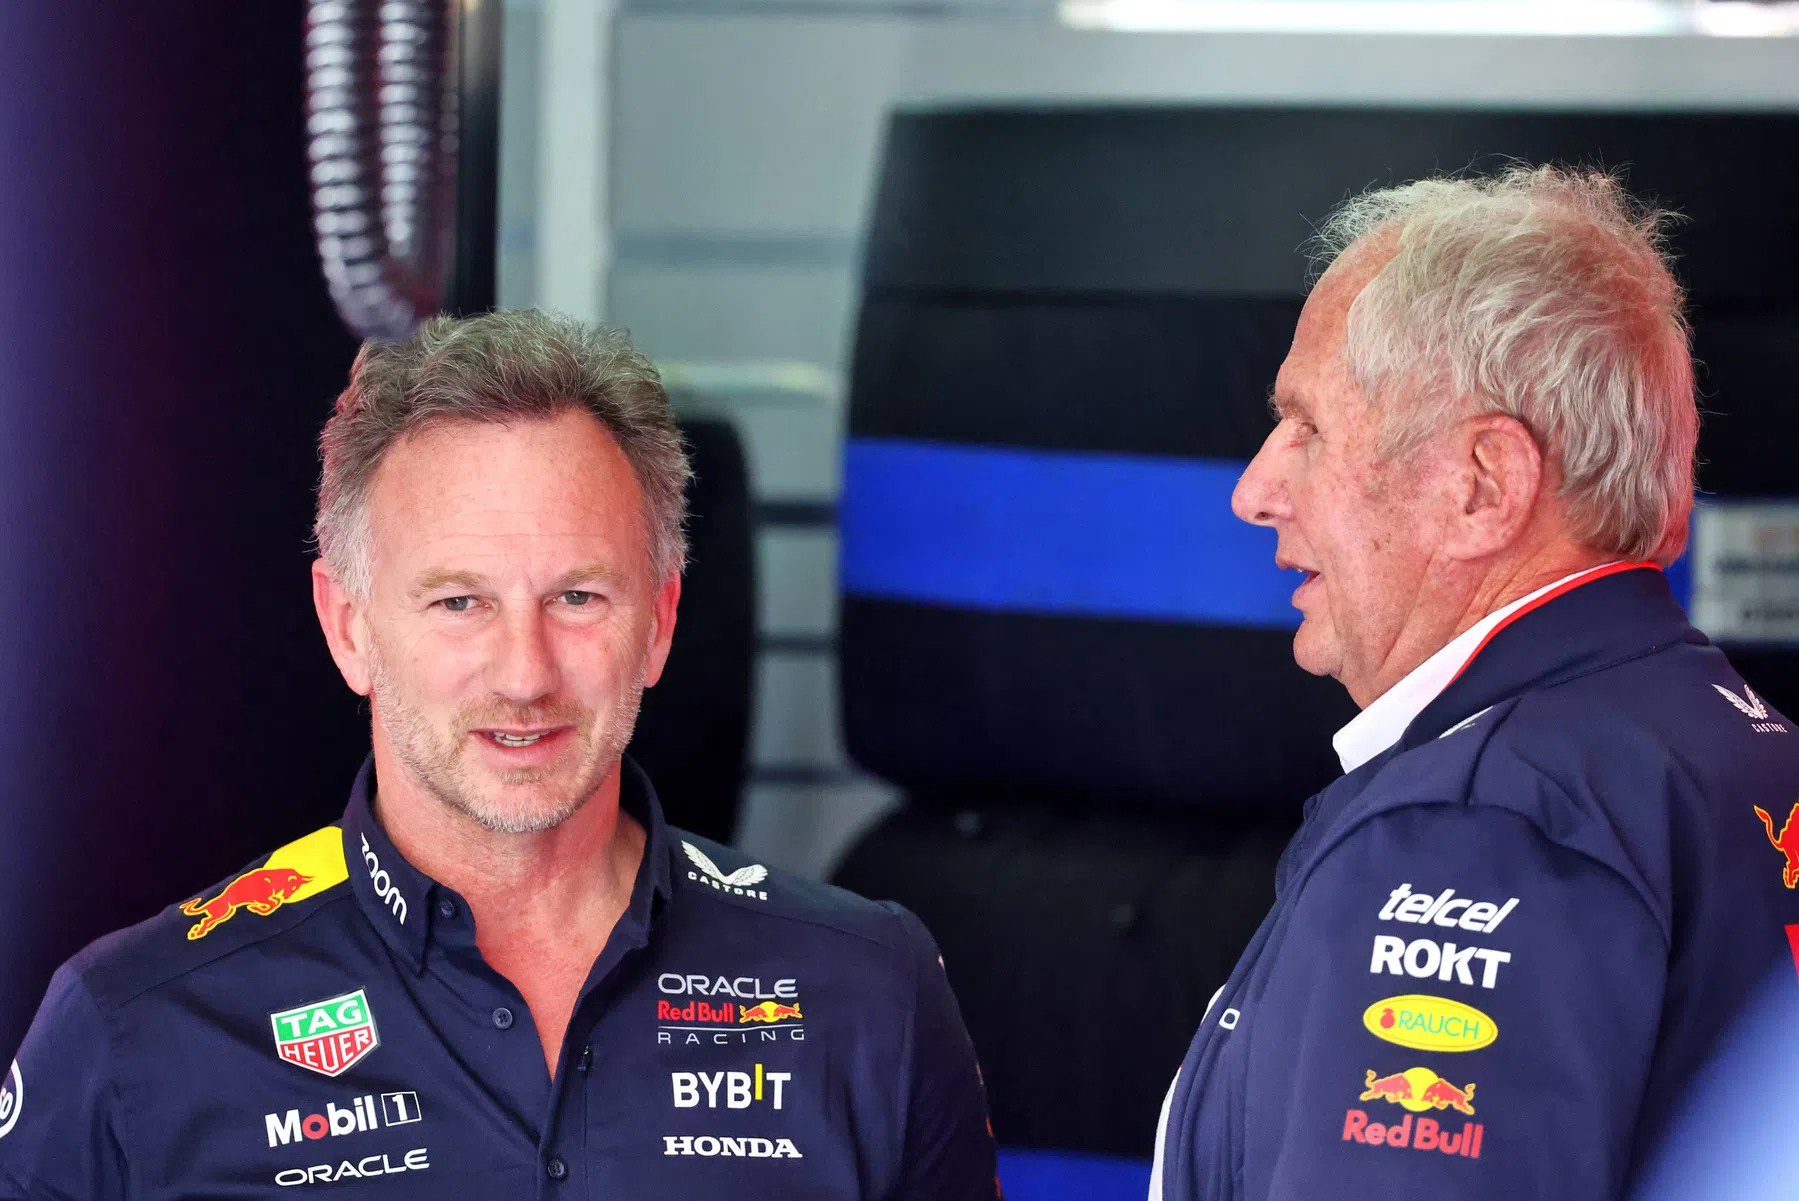 Power struggle between Horner and Marko possible reason he is staying